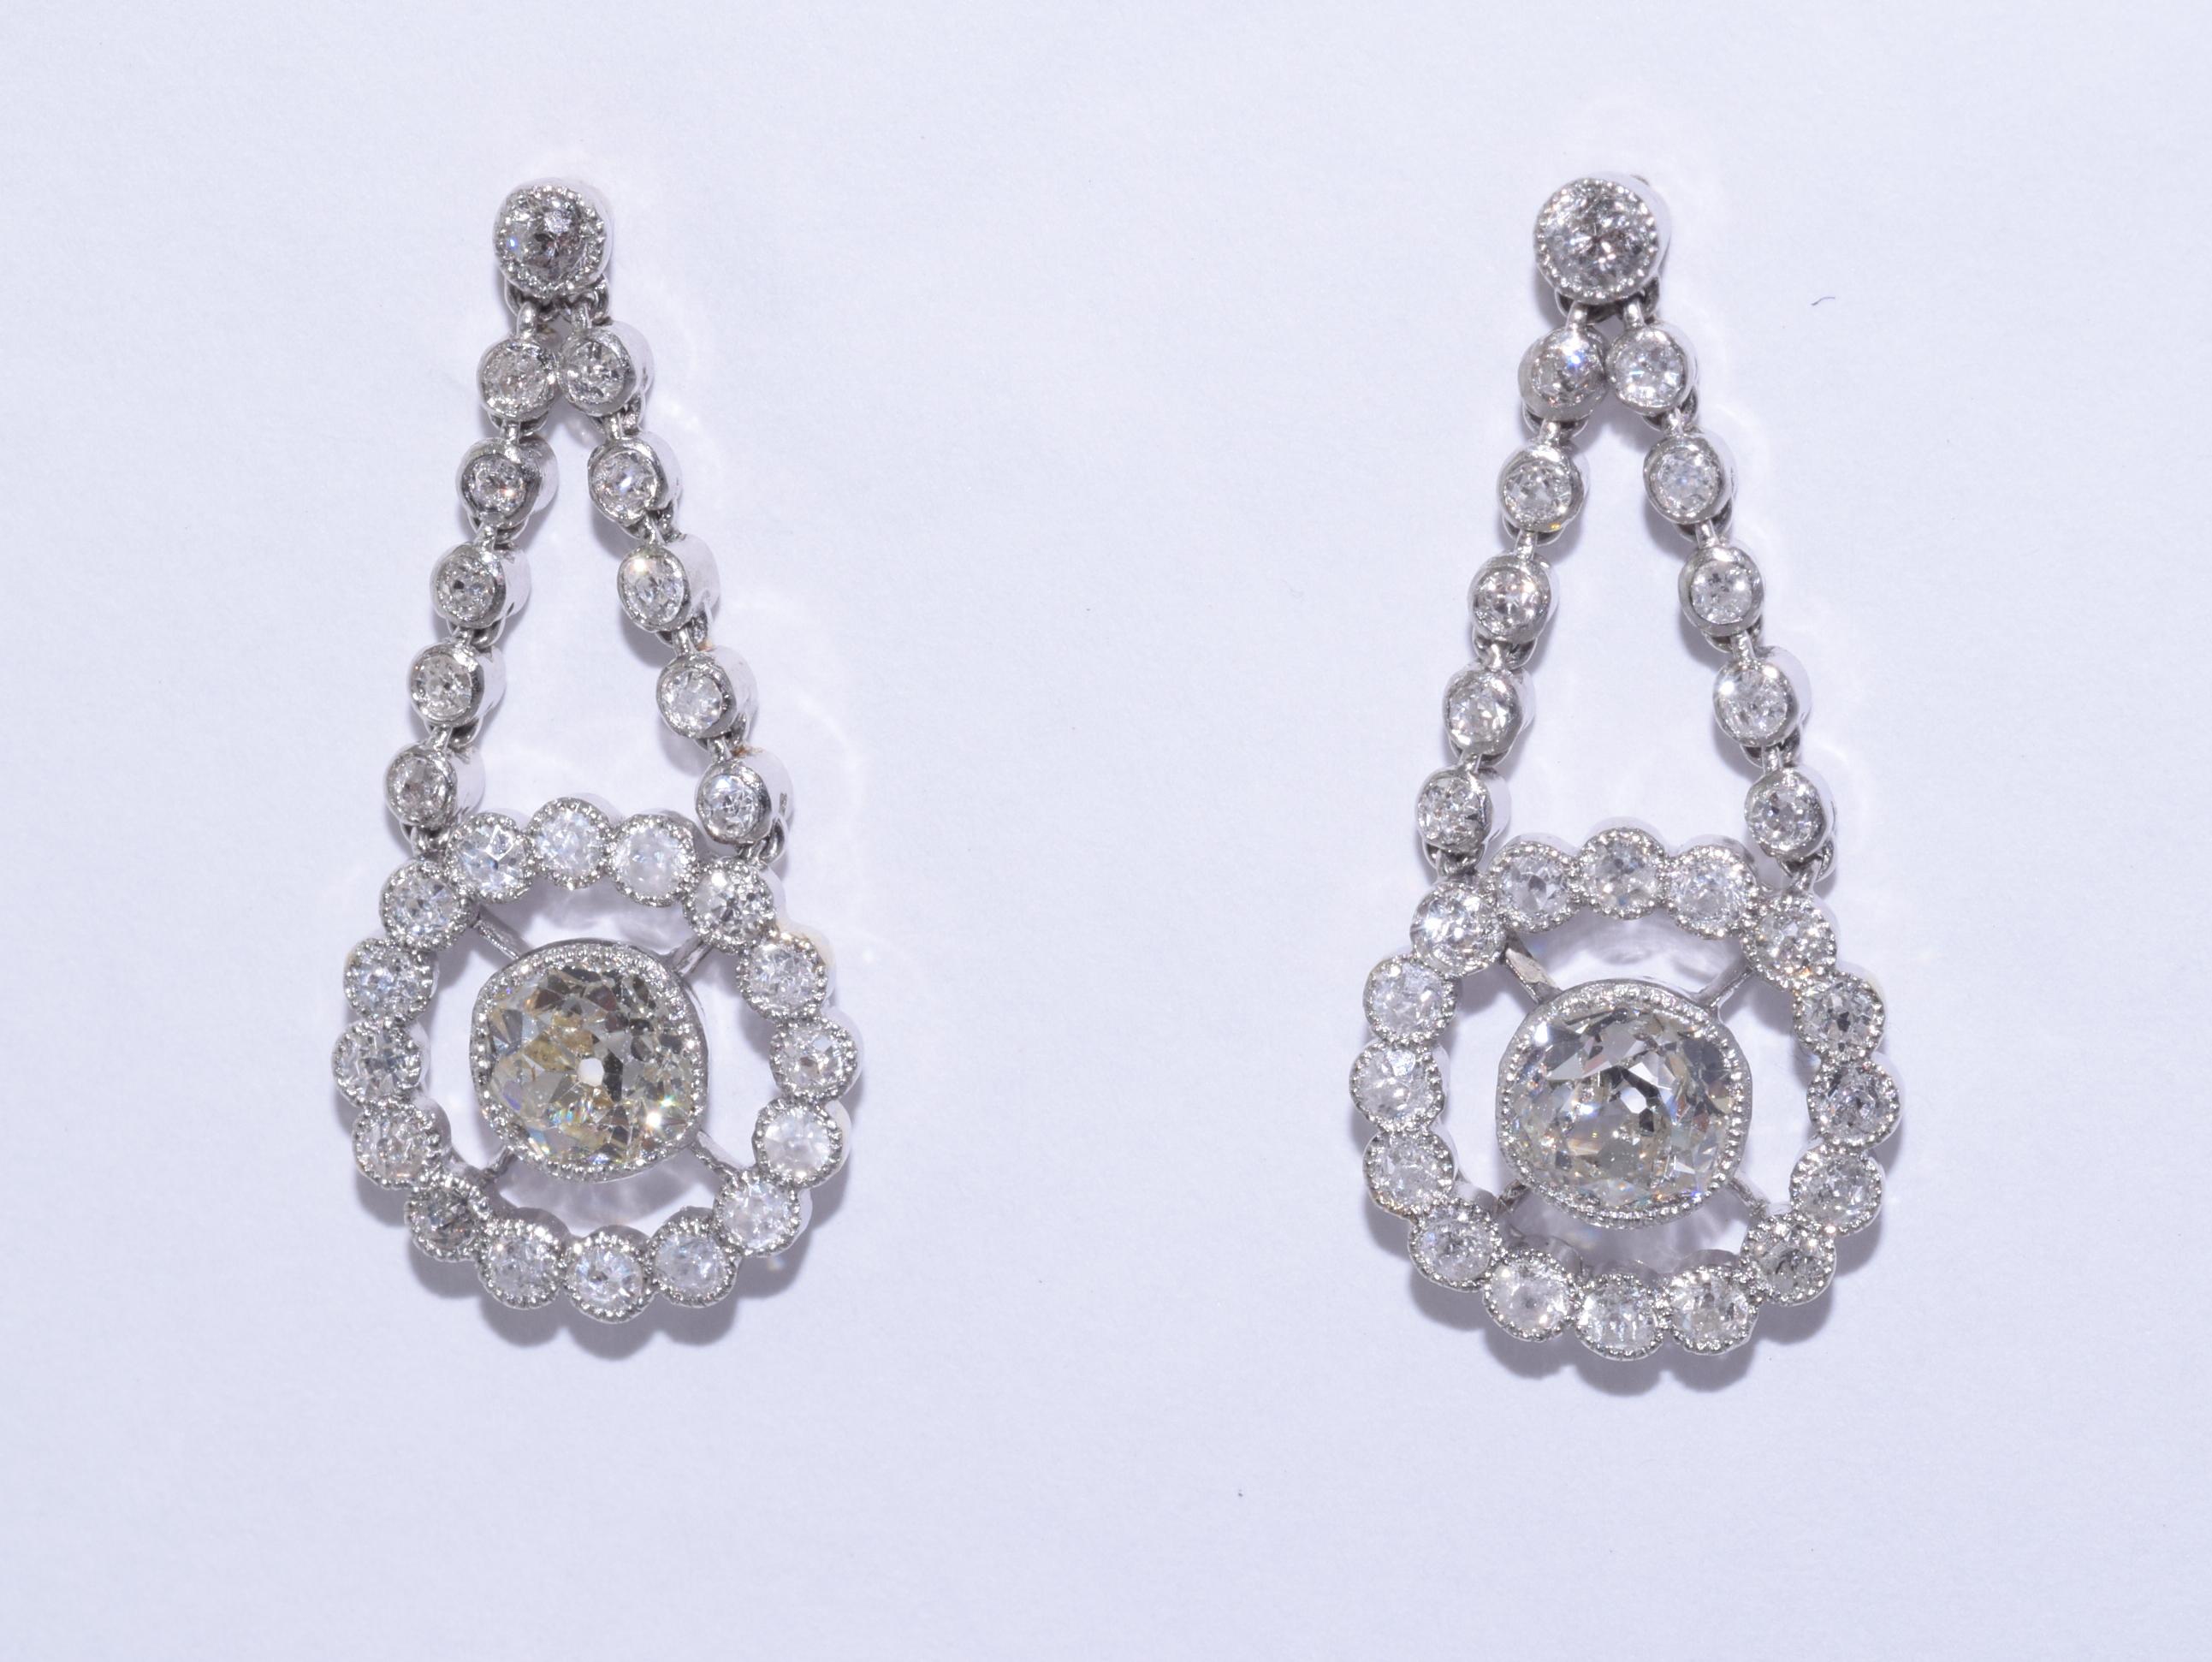 Old mine diamonds totaling approximately 0.75cts, of approximately I-L/I1 quality, are set in cluster ear pendants accented with a total of approximately
0.90ct of old mine and single cut diamonds mounted in platinum. The Edwardian elements have